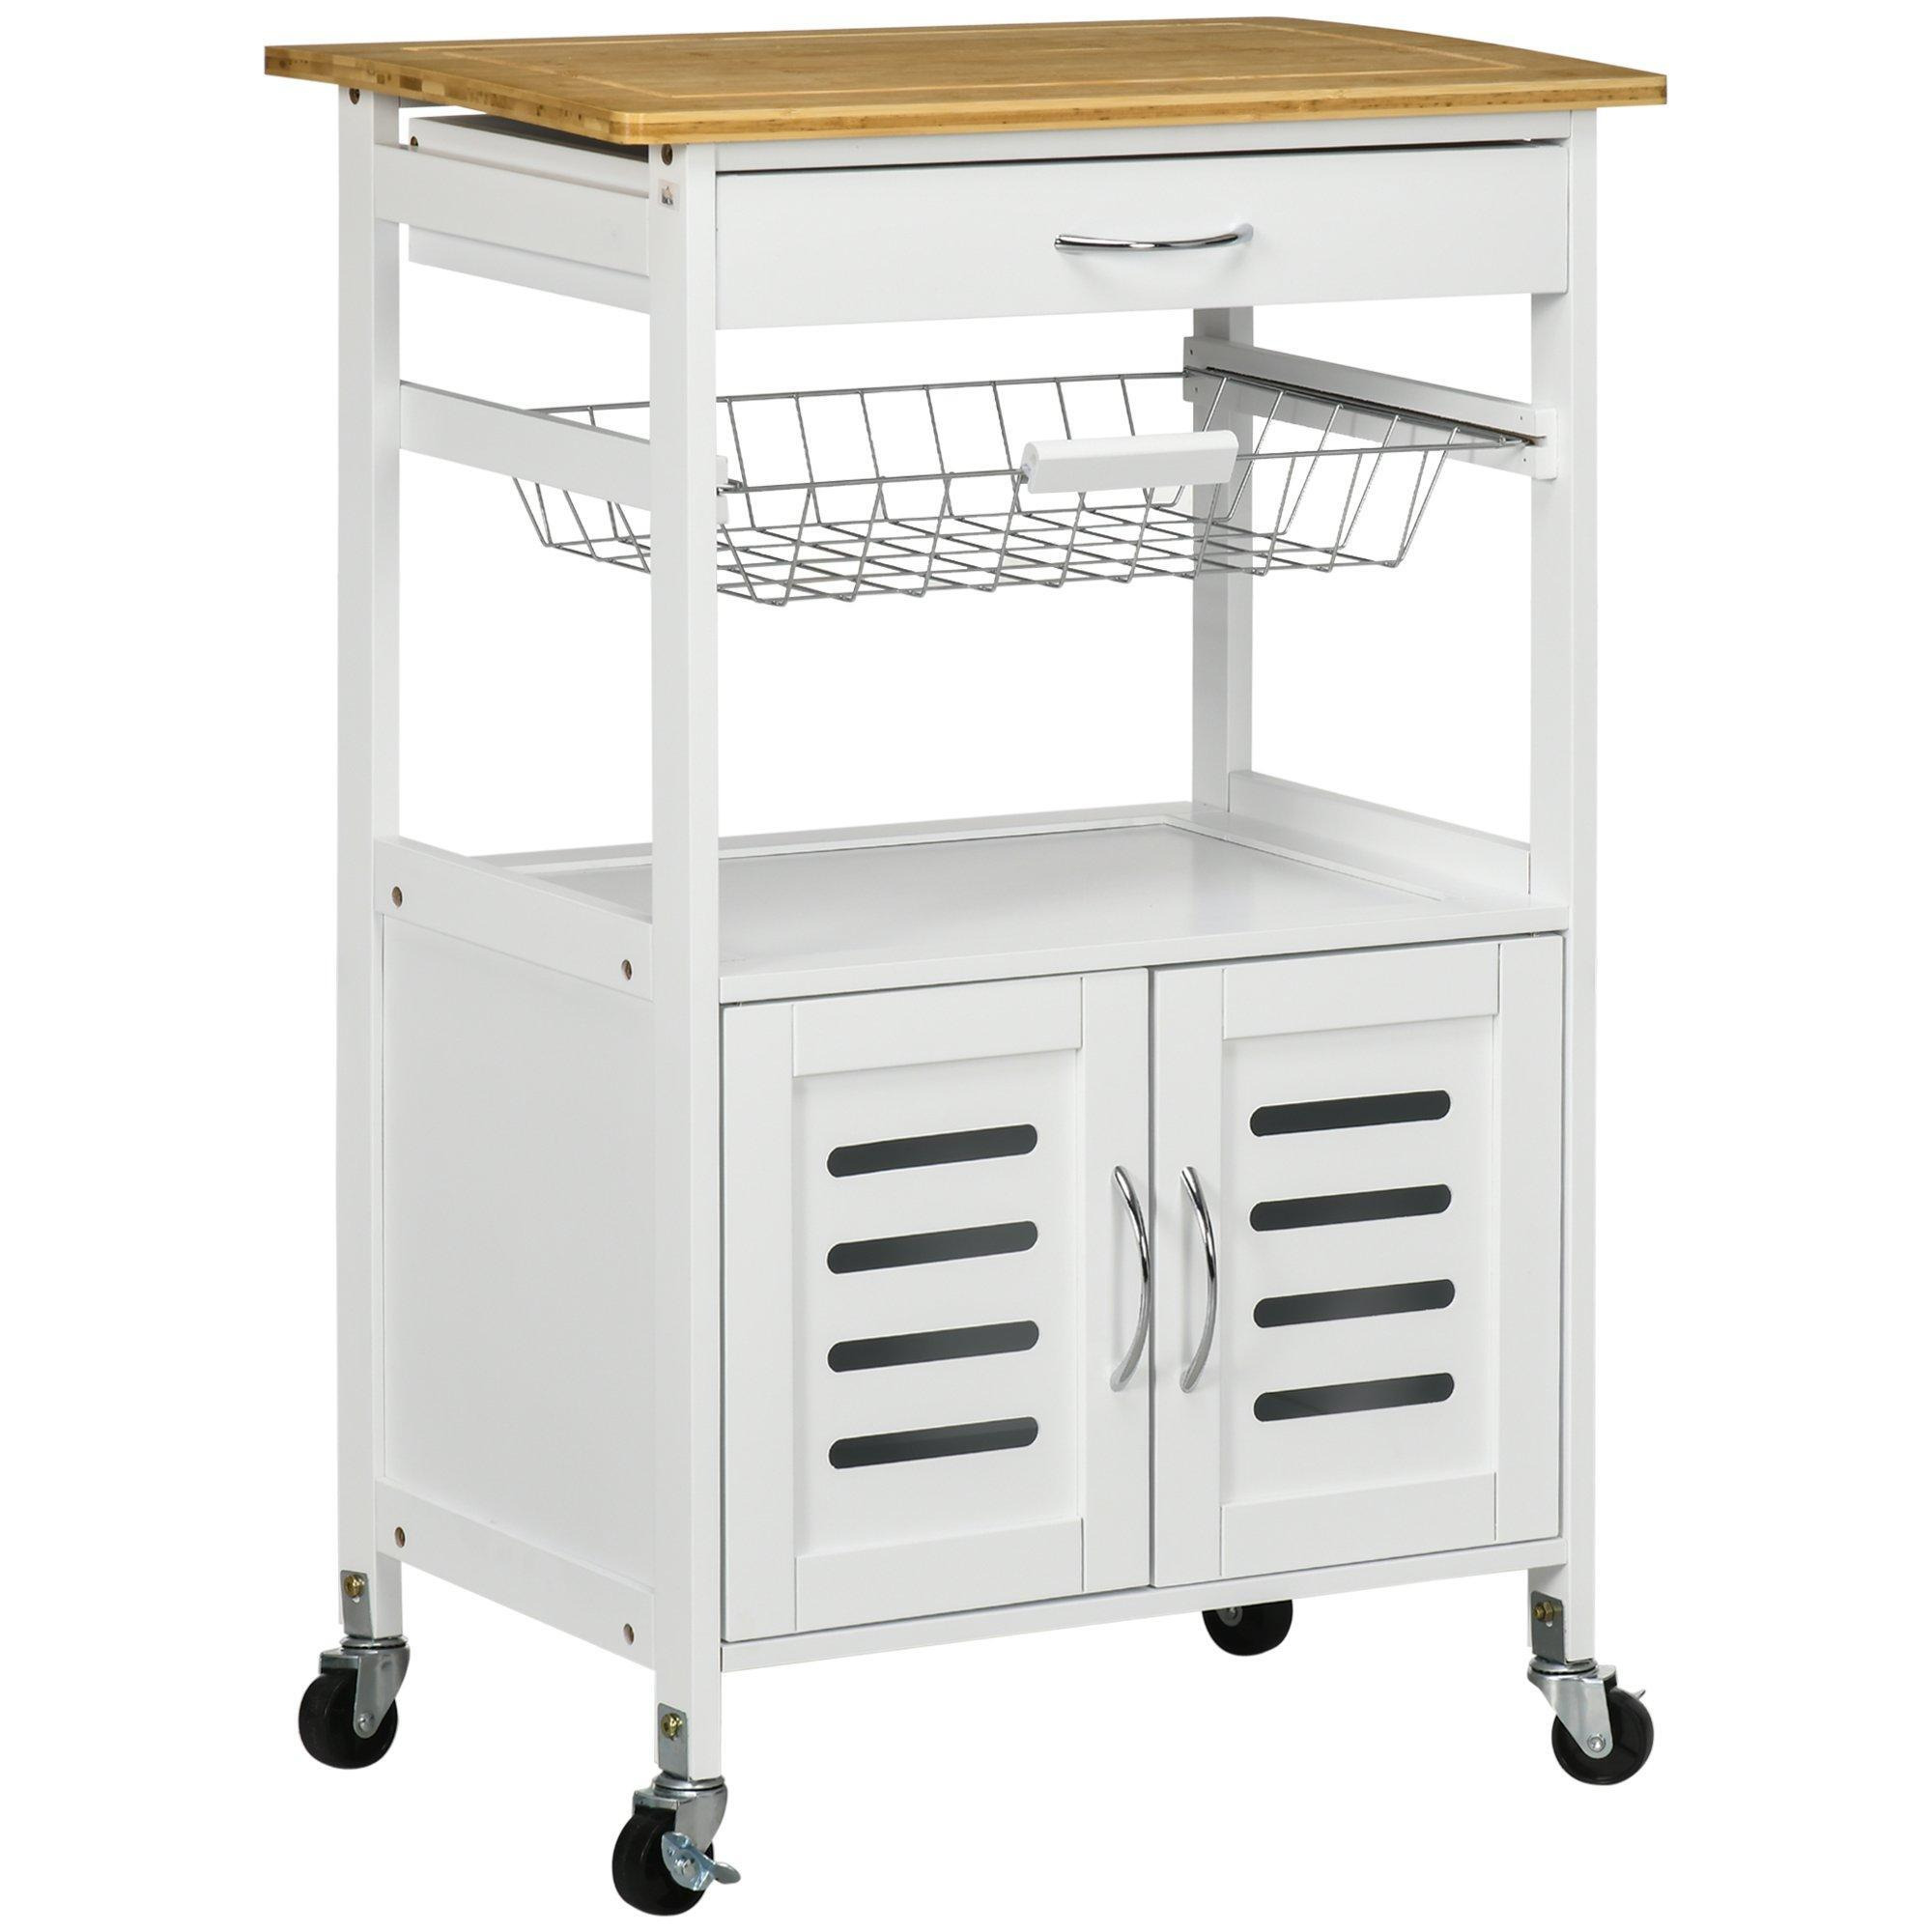 Rolling Kitchen Island Trolley Utility Cart on Wheels with Bamboo Top - image 1